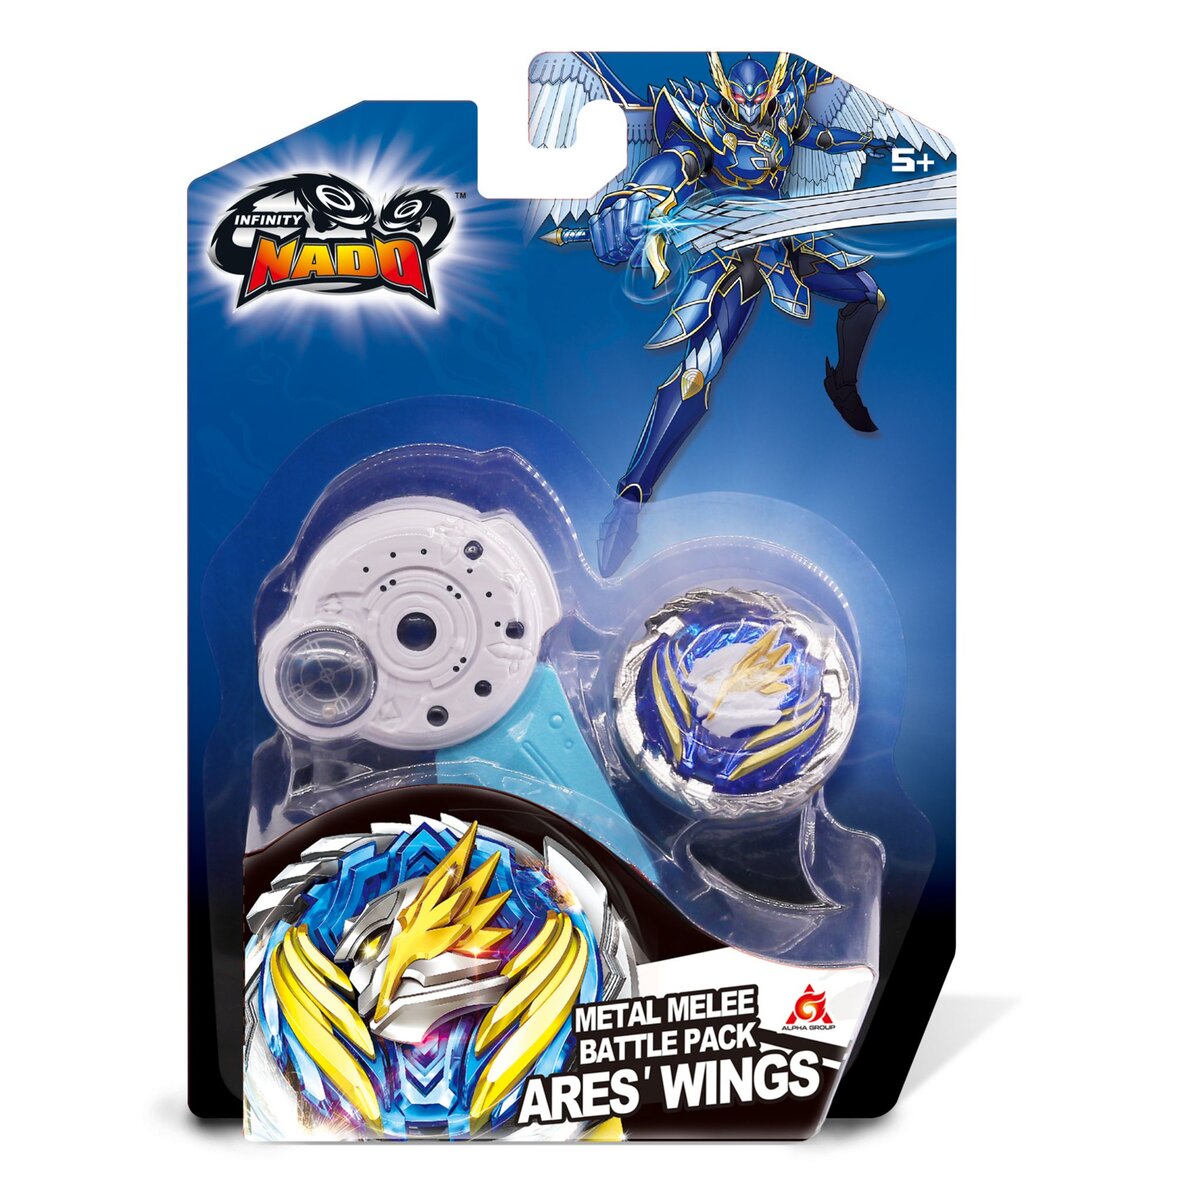 ALPHA GROUP Toupie Metal melee Battle Pack Ares Wings - Infinity Nado V